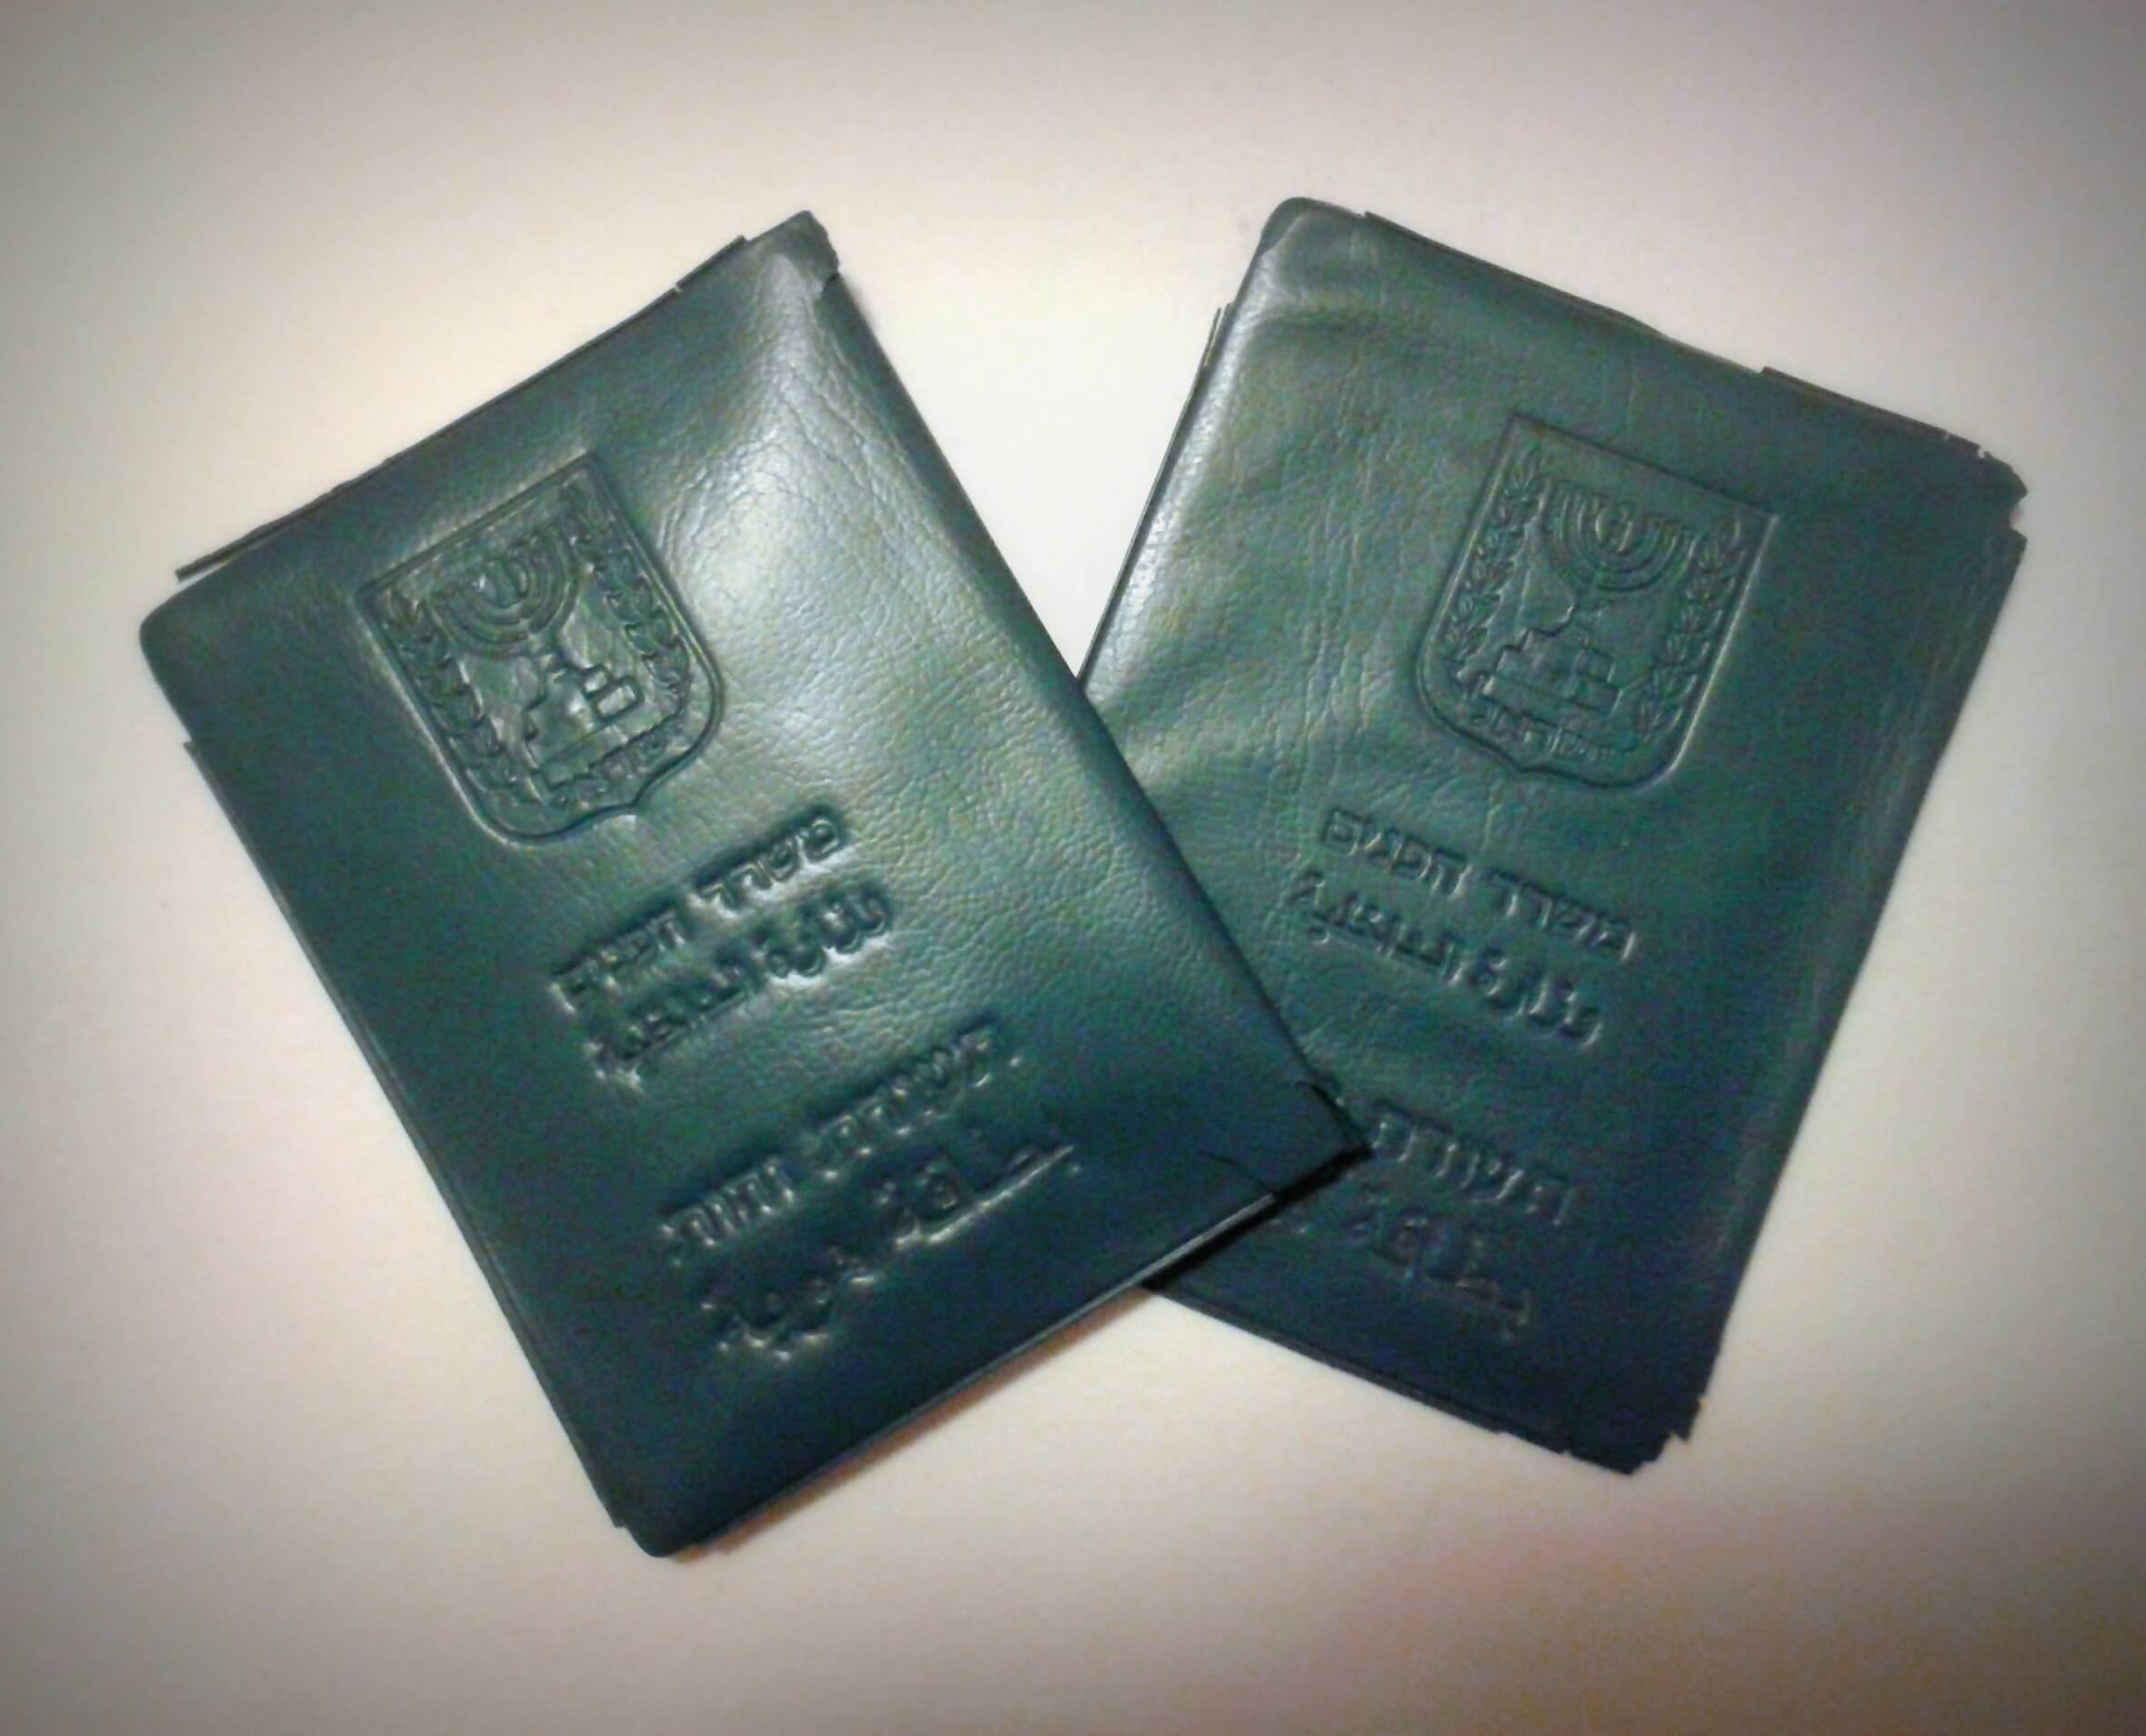 Israeli Permanent Residence Cancellation - A Permanent Resident holds an Identity Card but not a Passport